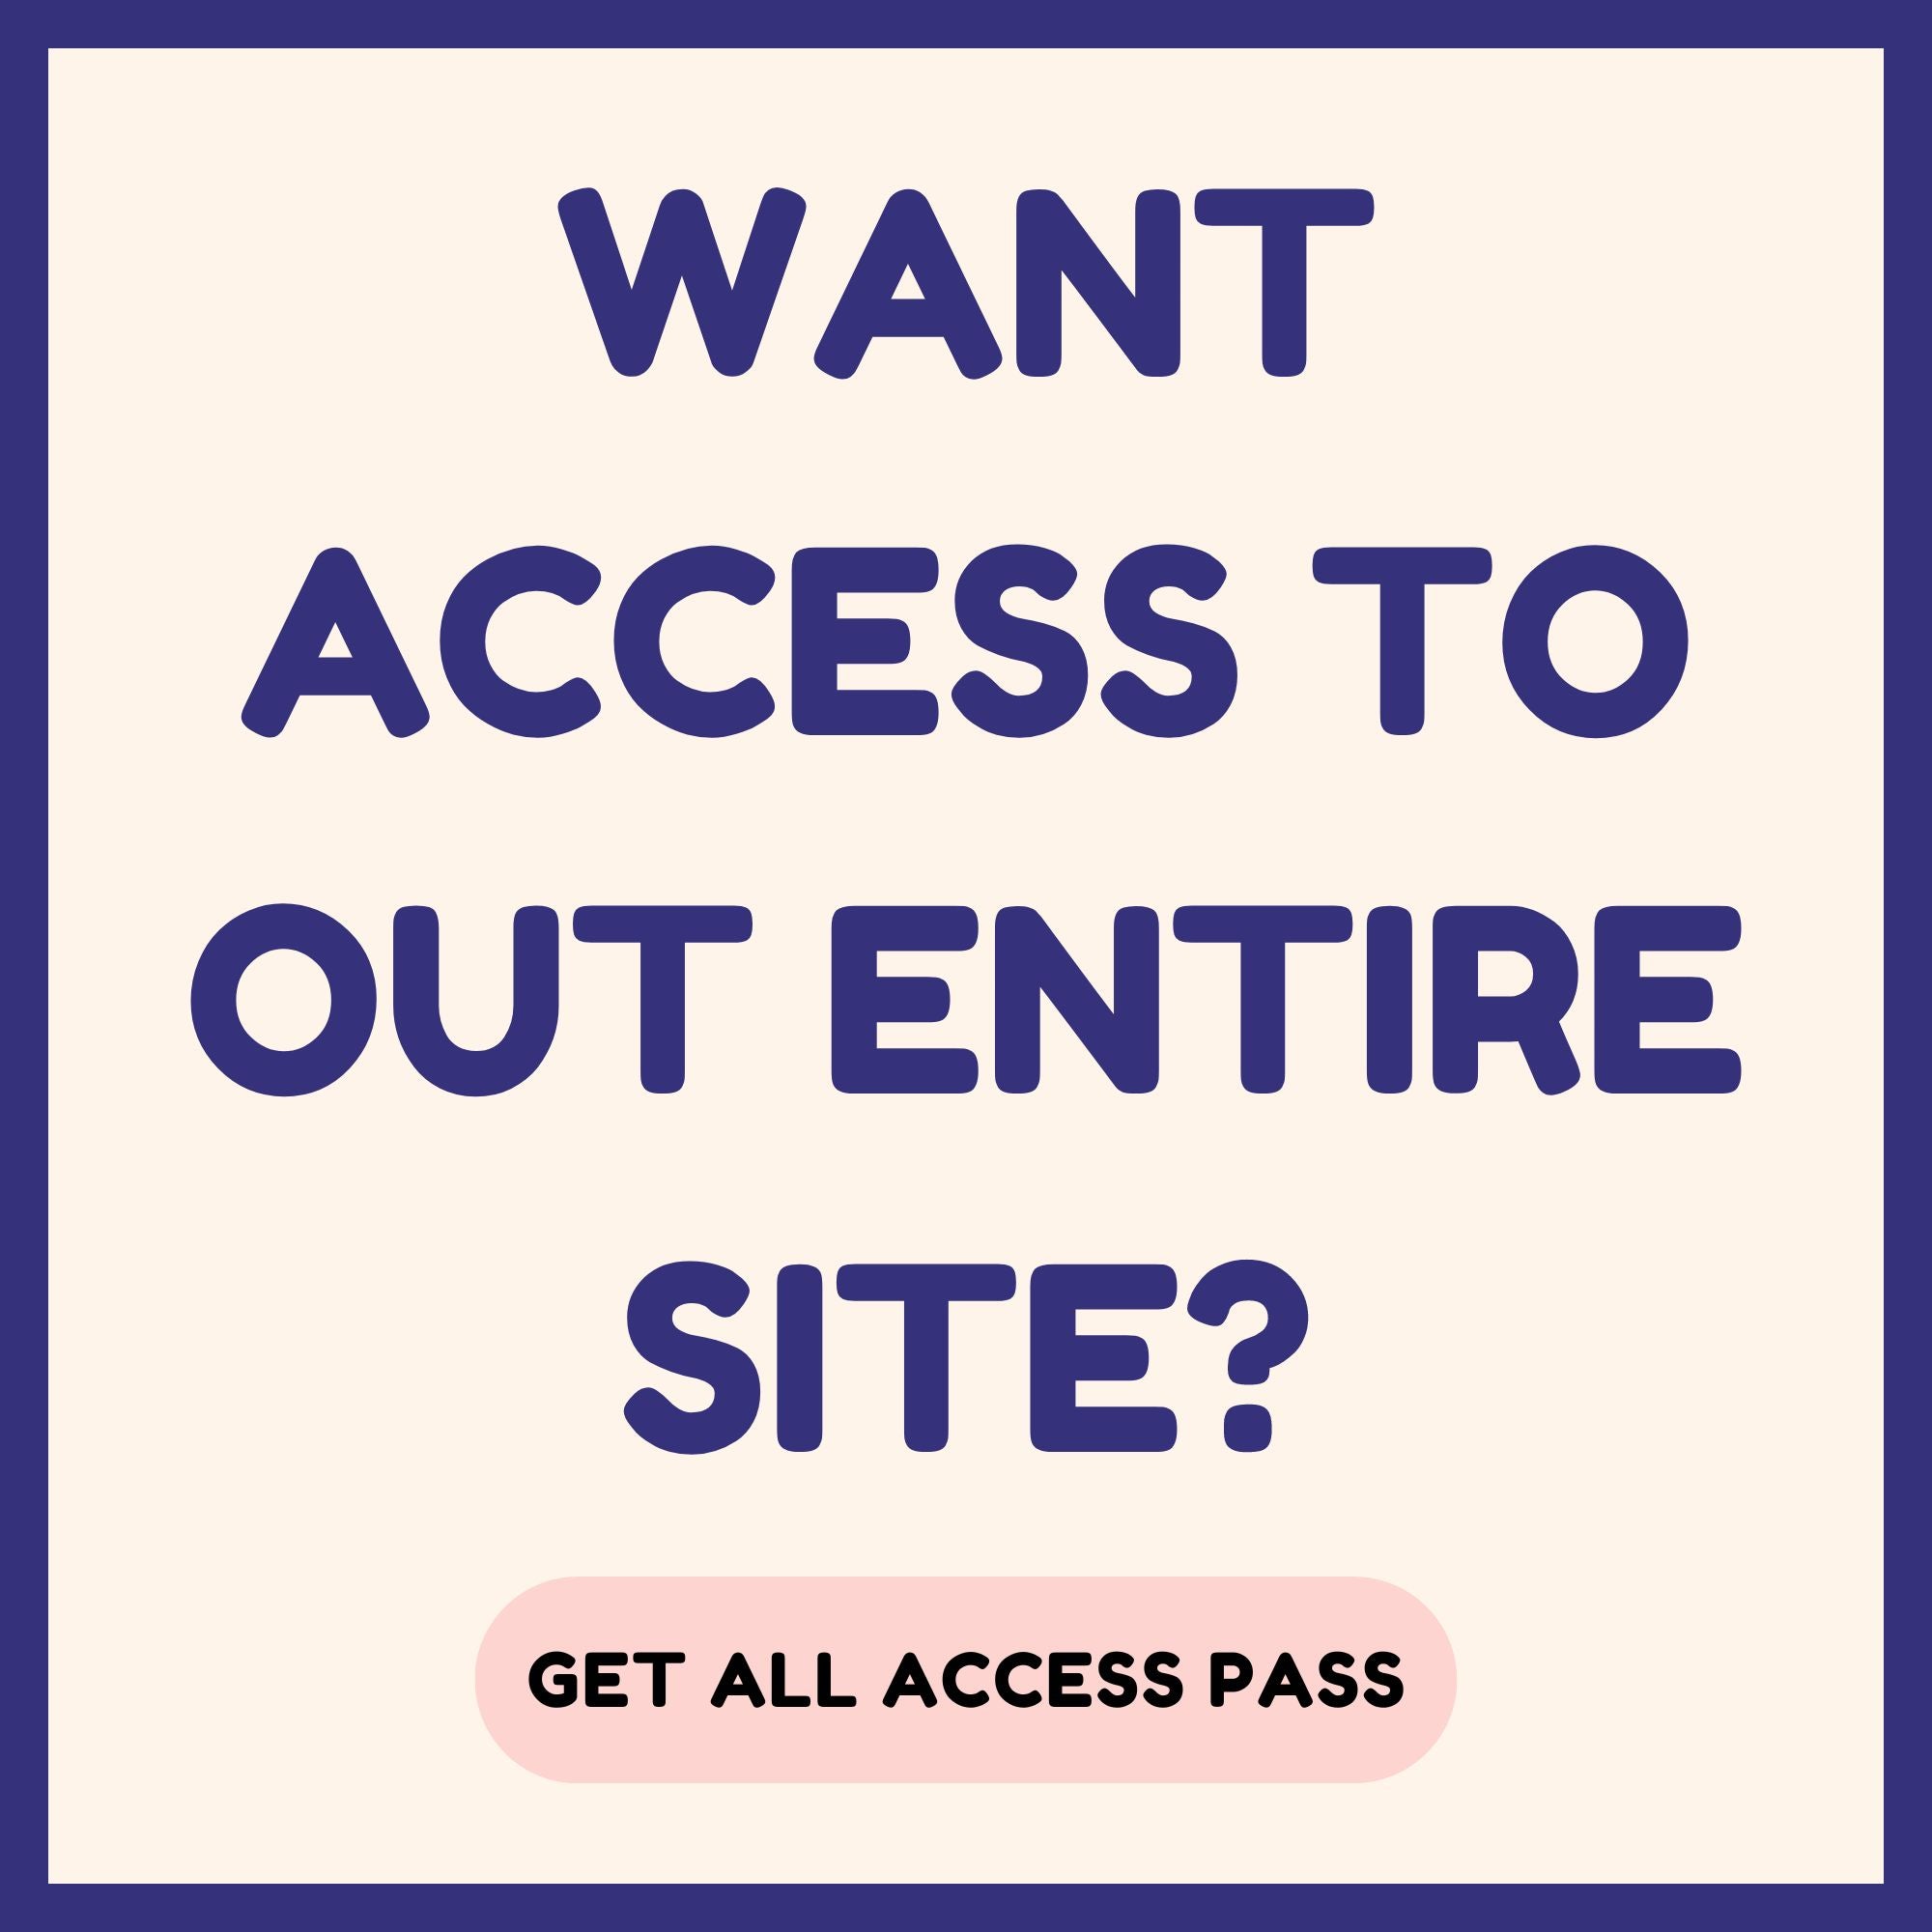 Unlimited Downloads - All Access Pass